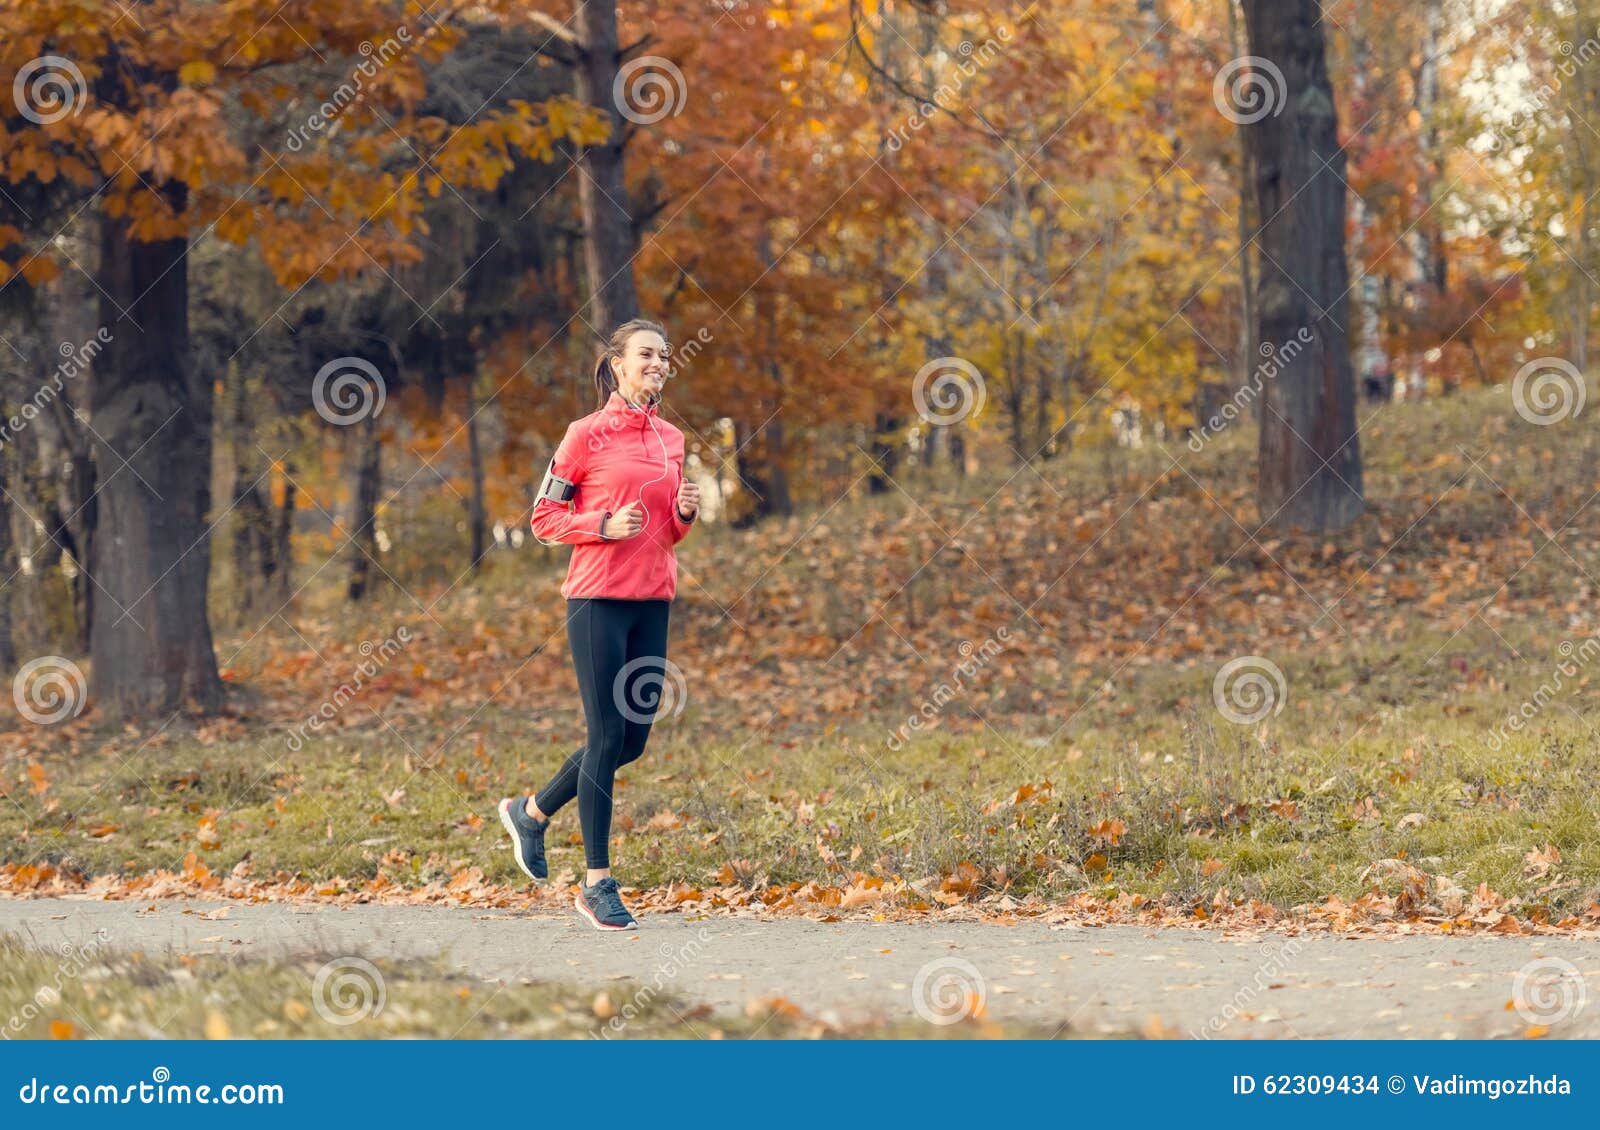 Running in the autumn park stock photo. Image of happy - 62309434